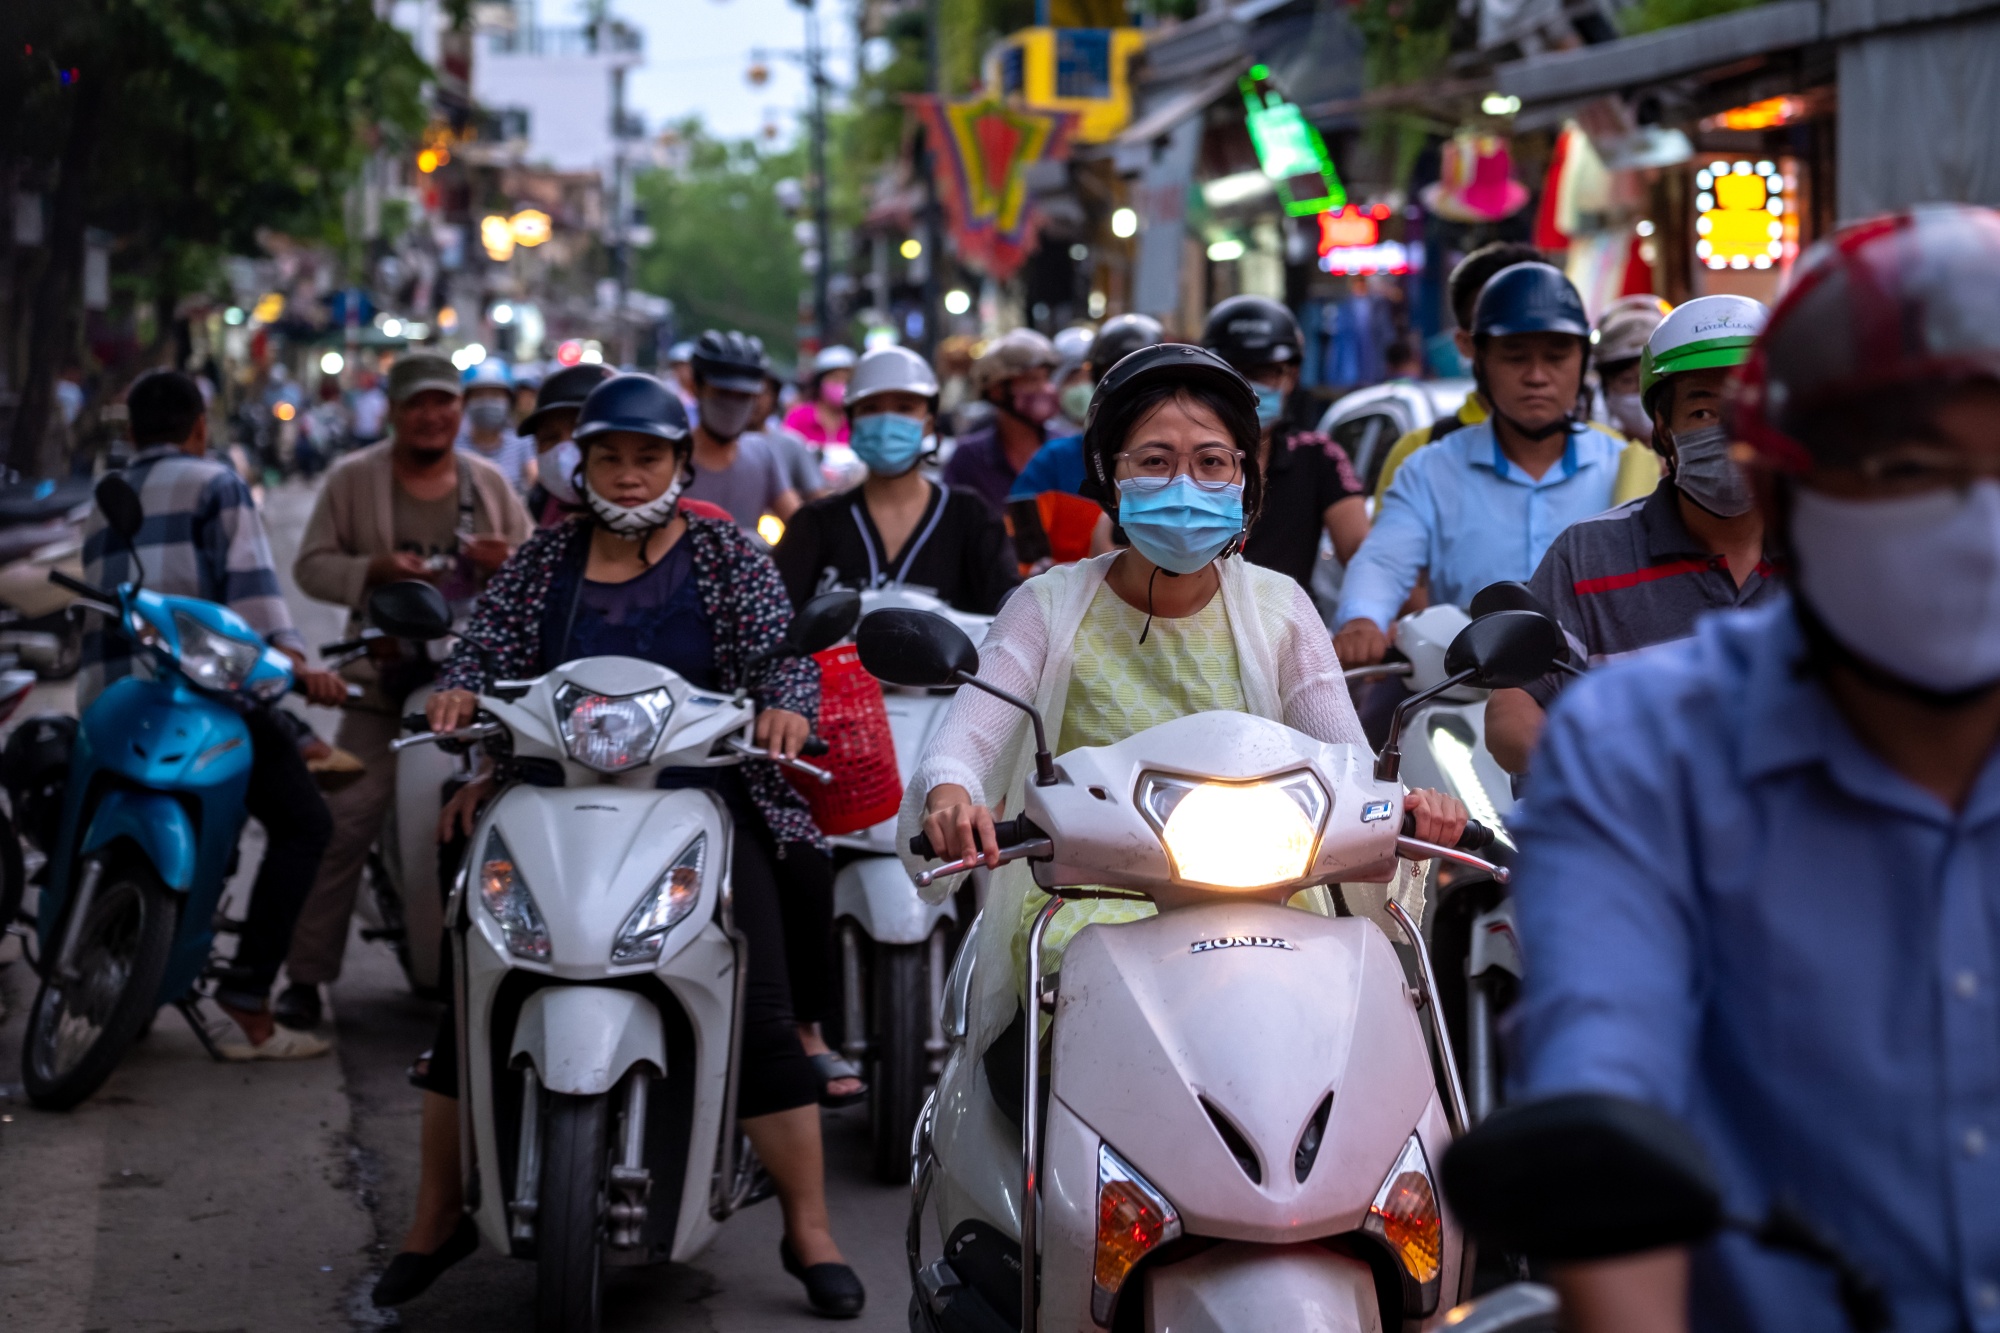 Vietnam Rules on Face Mask in Many Public Spaces - Bloomberg